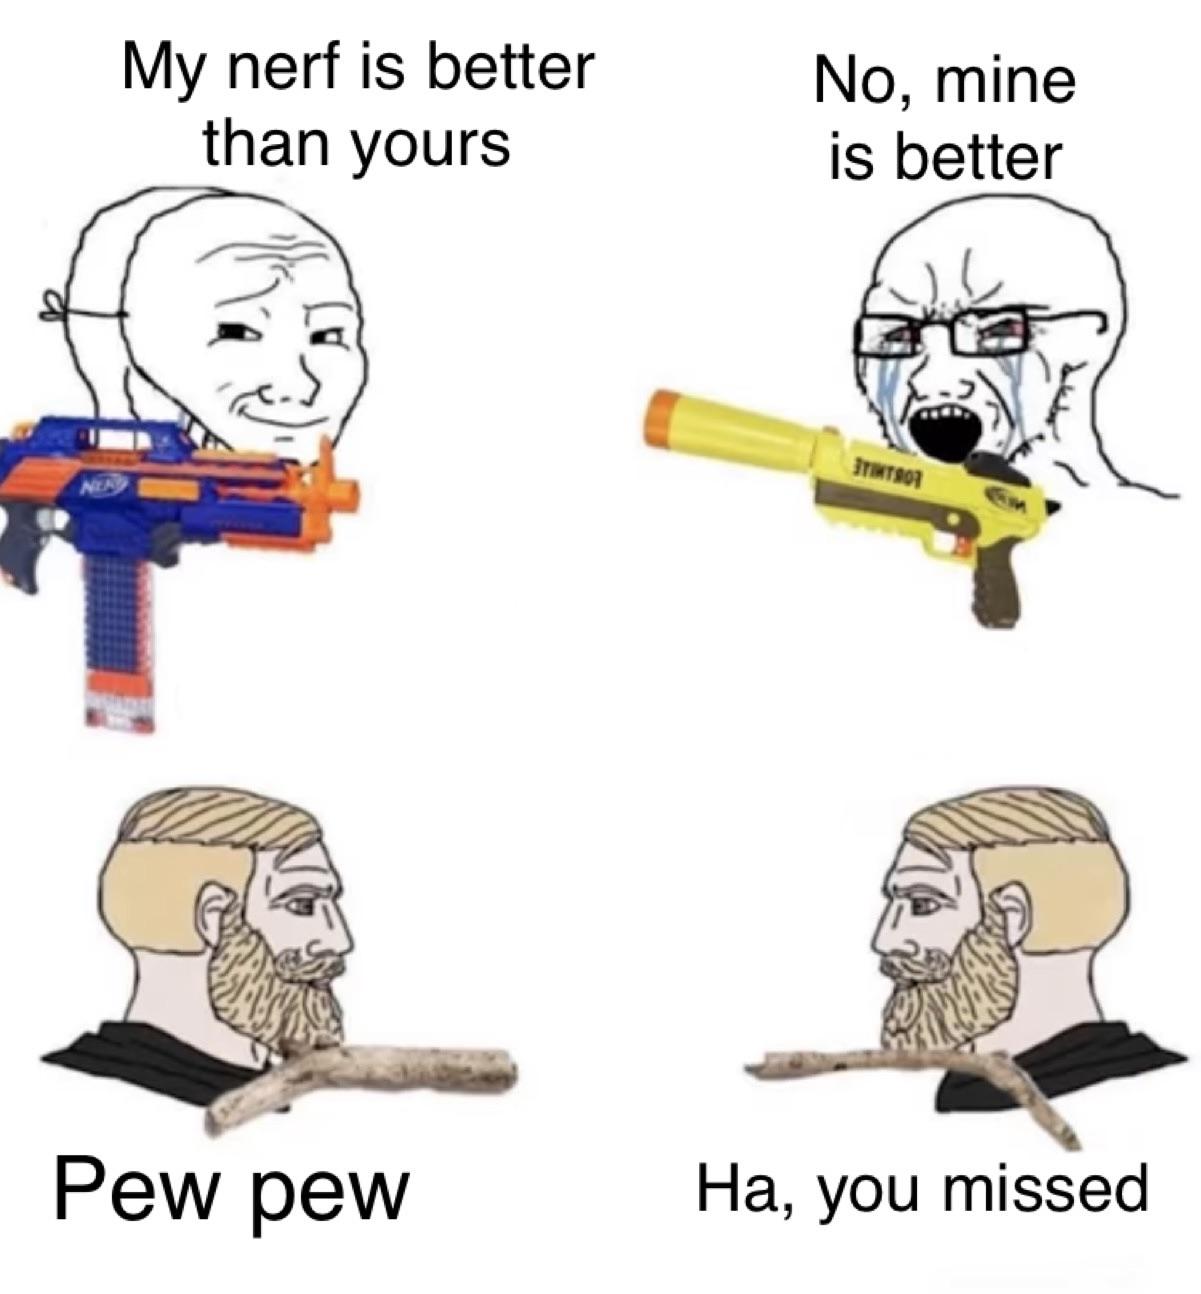 hilarious memes - nerf fortnite meme - My nerf is better than yours No, mine is better Ituation Nea Pew pew Ha, you missed